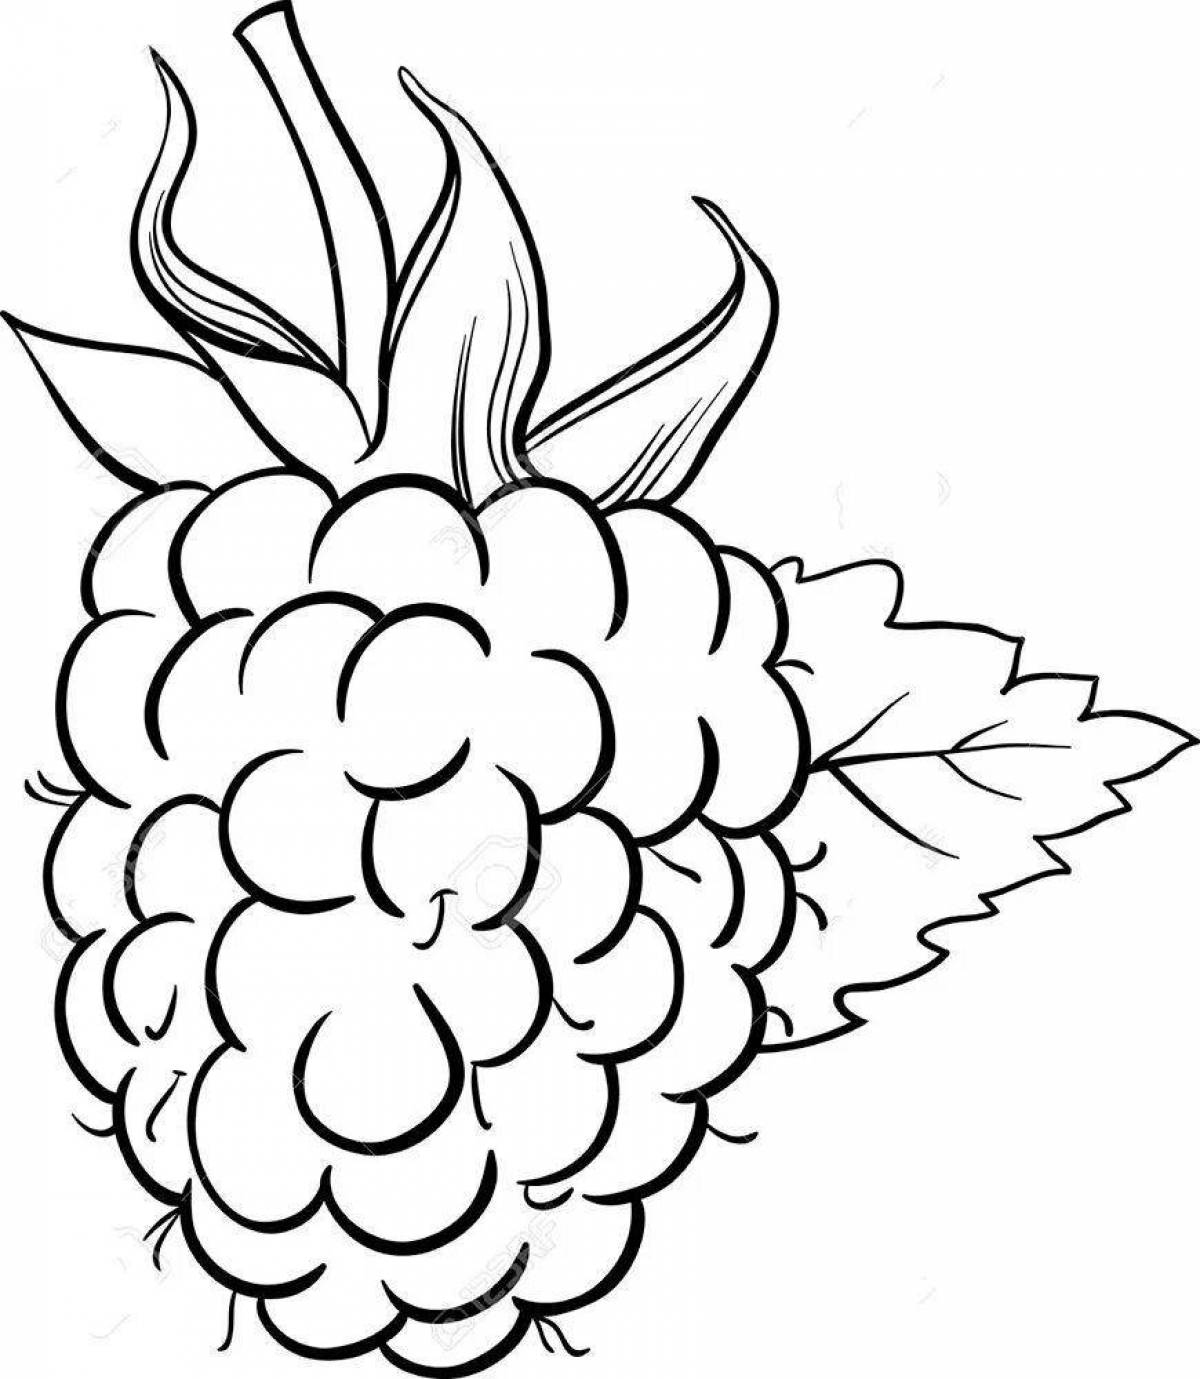 Playful raspberry coloring book for 3-4 year olds